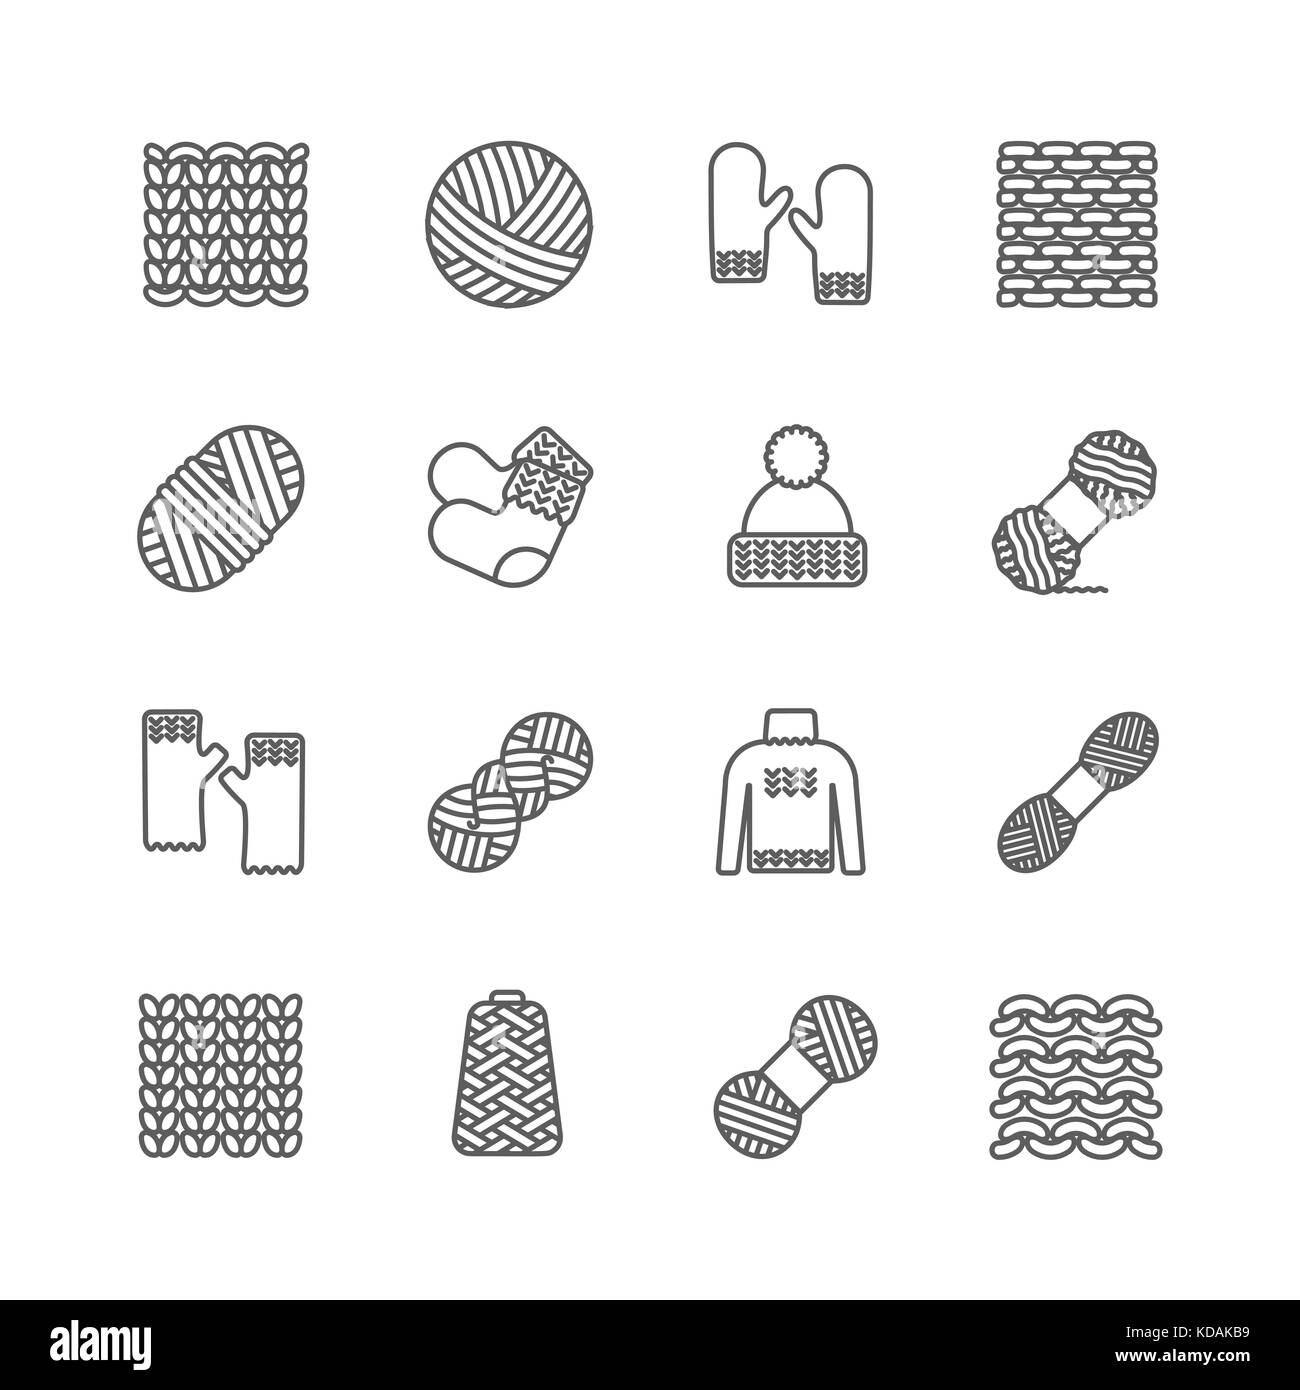 Knit icon set. Yarn, knittind clothes, knitted samples thin line sign. Hat, mittens, socks, sweater and other hand-knitted garments Stock Vector